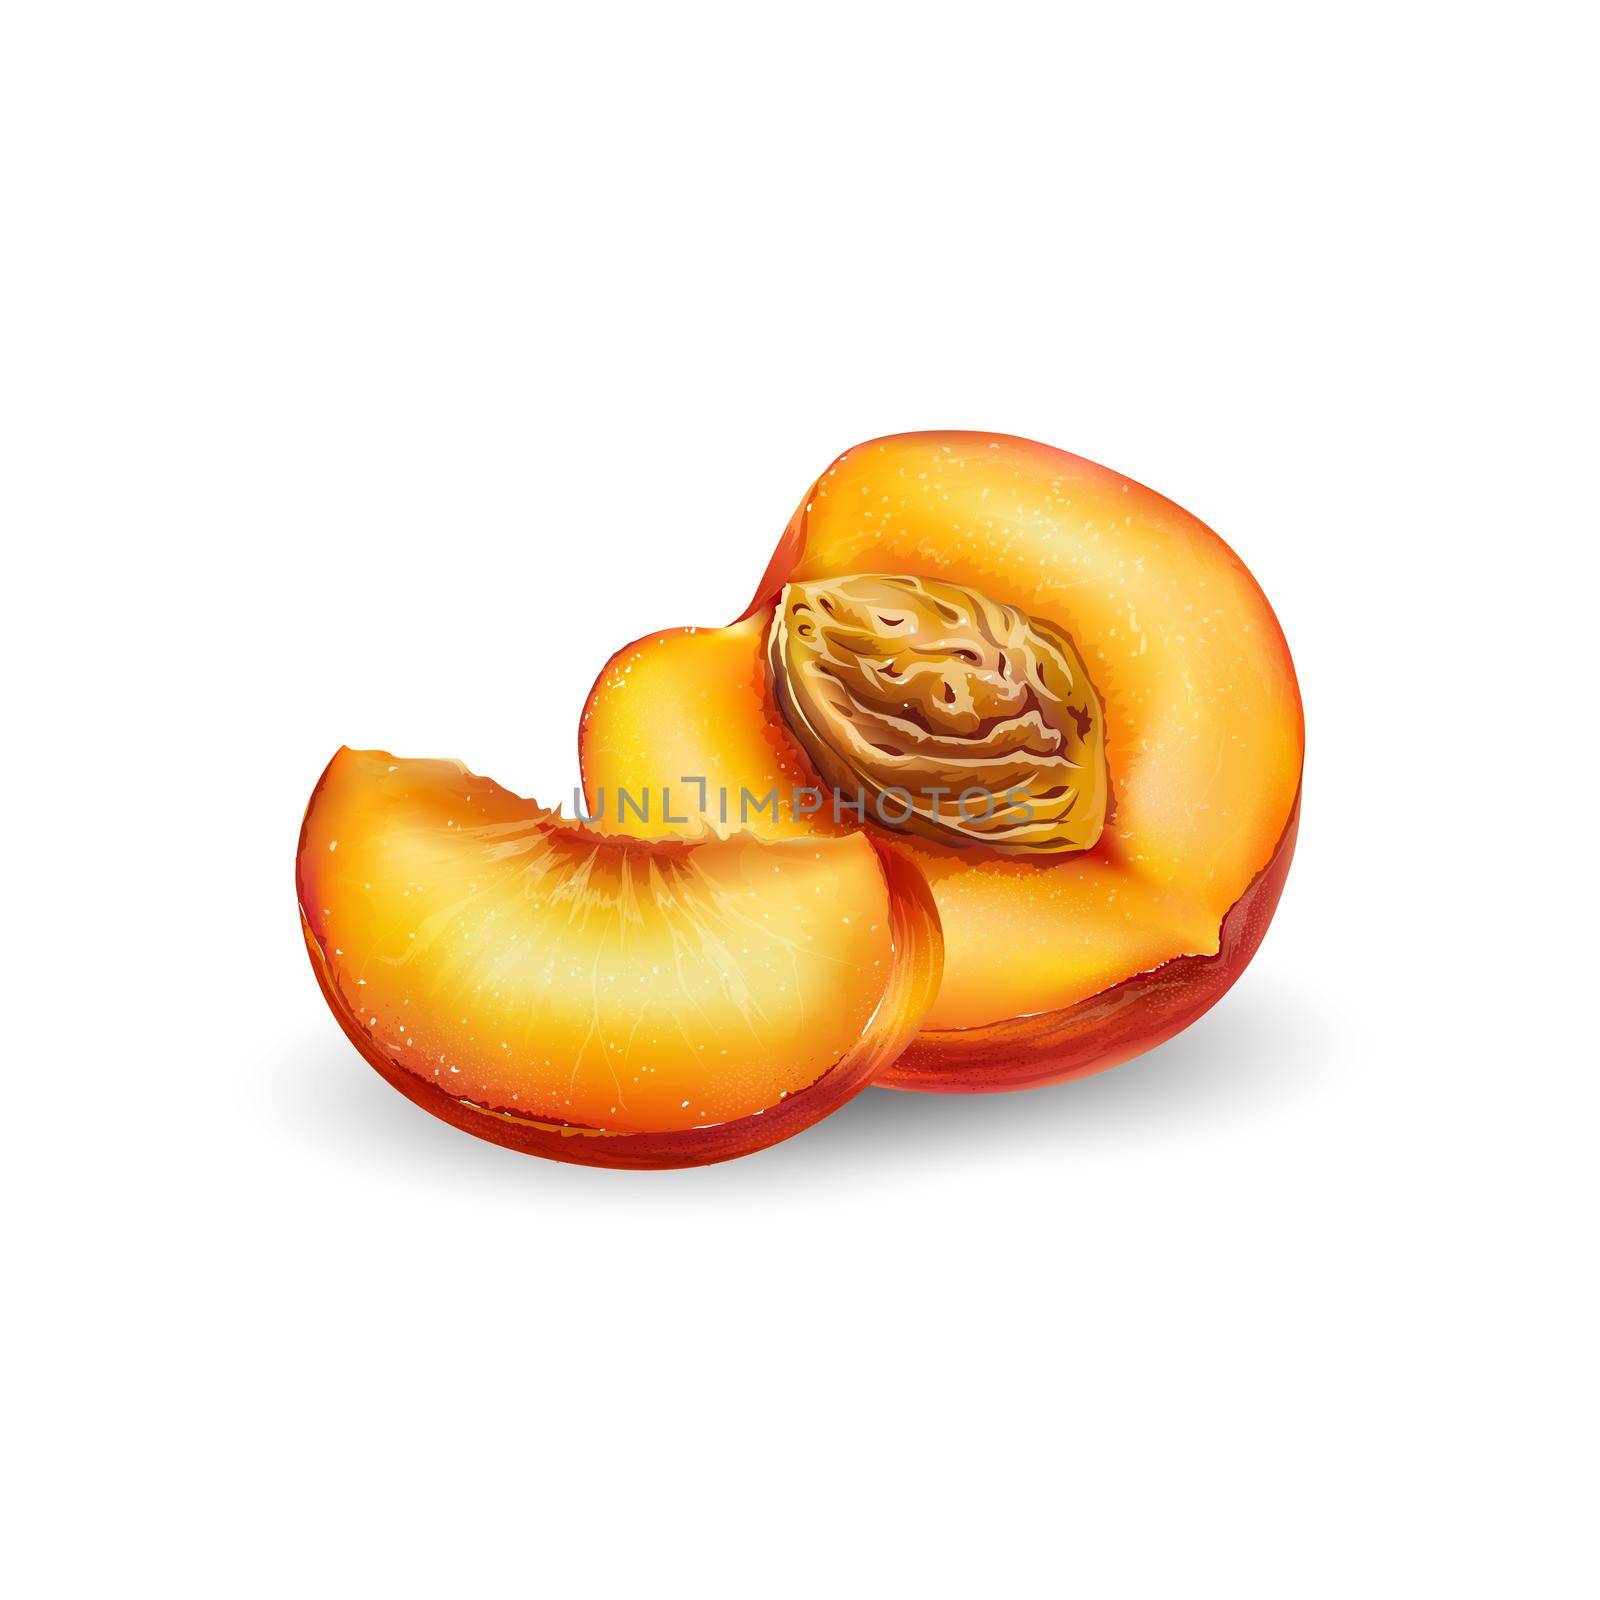 Sliced peach with pit on a white background. by ConceptCafe